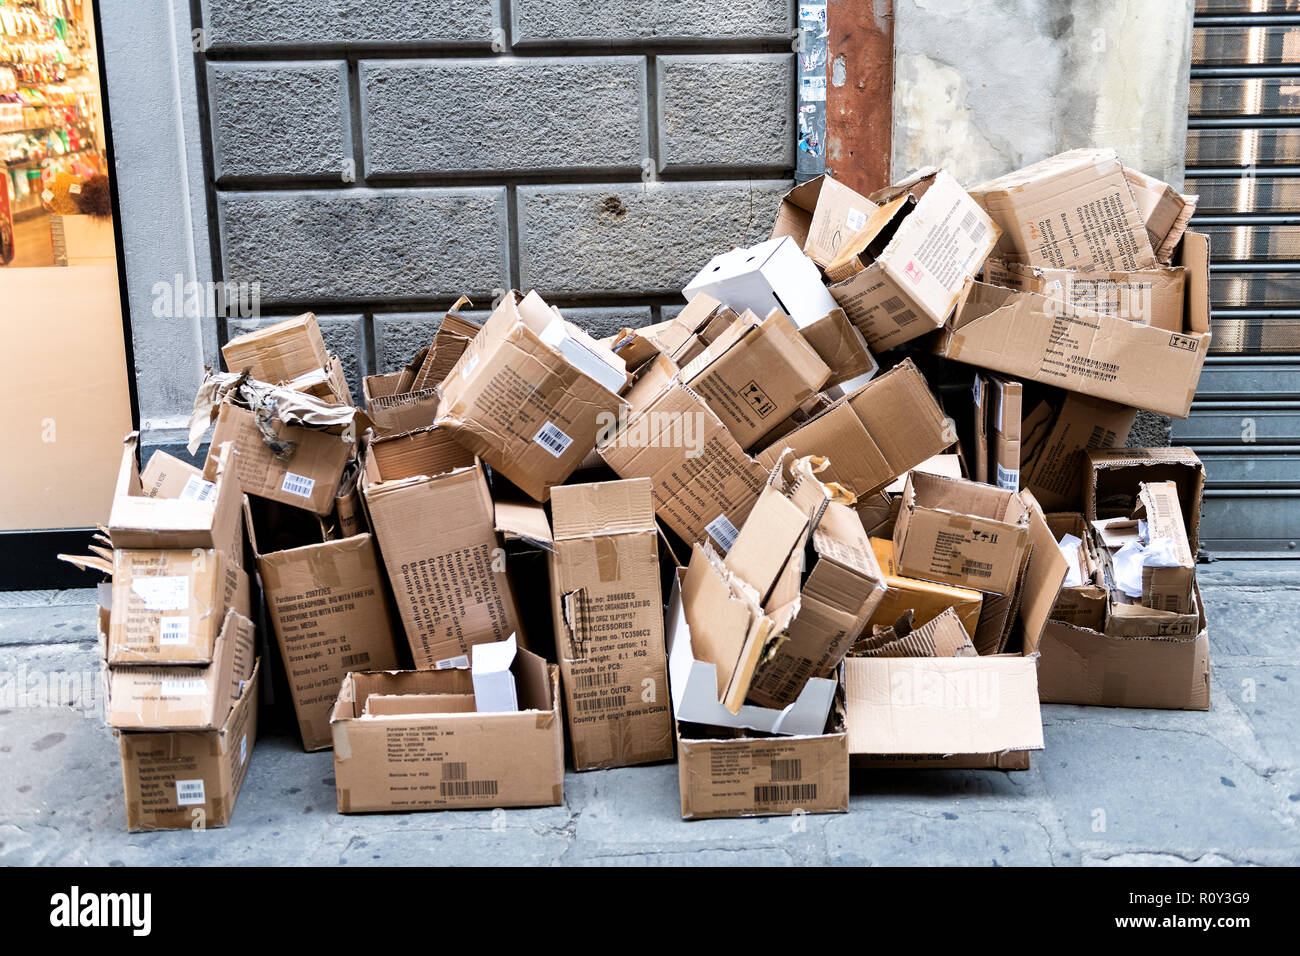 Florence, Italy - August 31, 2018: Pile, stack of many discarded empty cardboard boxes, lying on the street, sidewalk in Firenze, trash, rubbish, litt Stock Photo